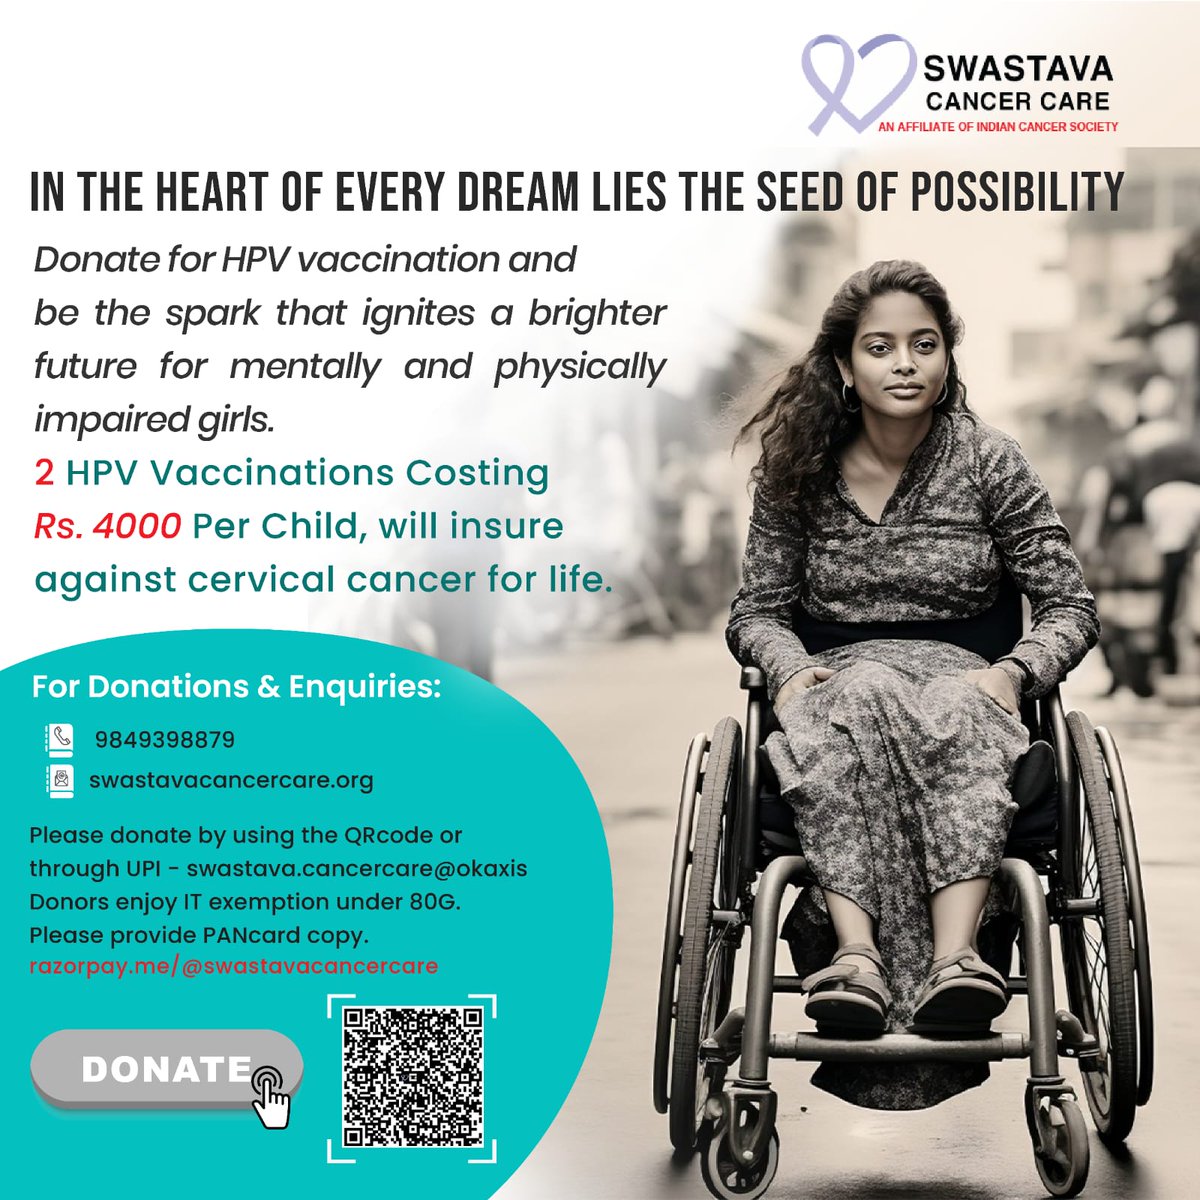 Your #donation of Rs. 4000 can change that. It provides 2 doses of the #HPV vaccine, granting a lifetime of protection to a girl who might not otherwise have it

Donate Now: swastavacancercare.org

#swastavacare #physically #mentally #poverty  #FightCervicalCancer #empowergirls